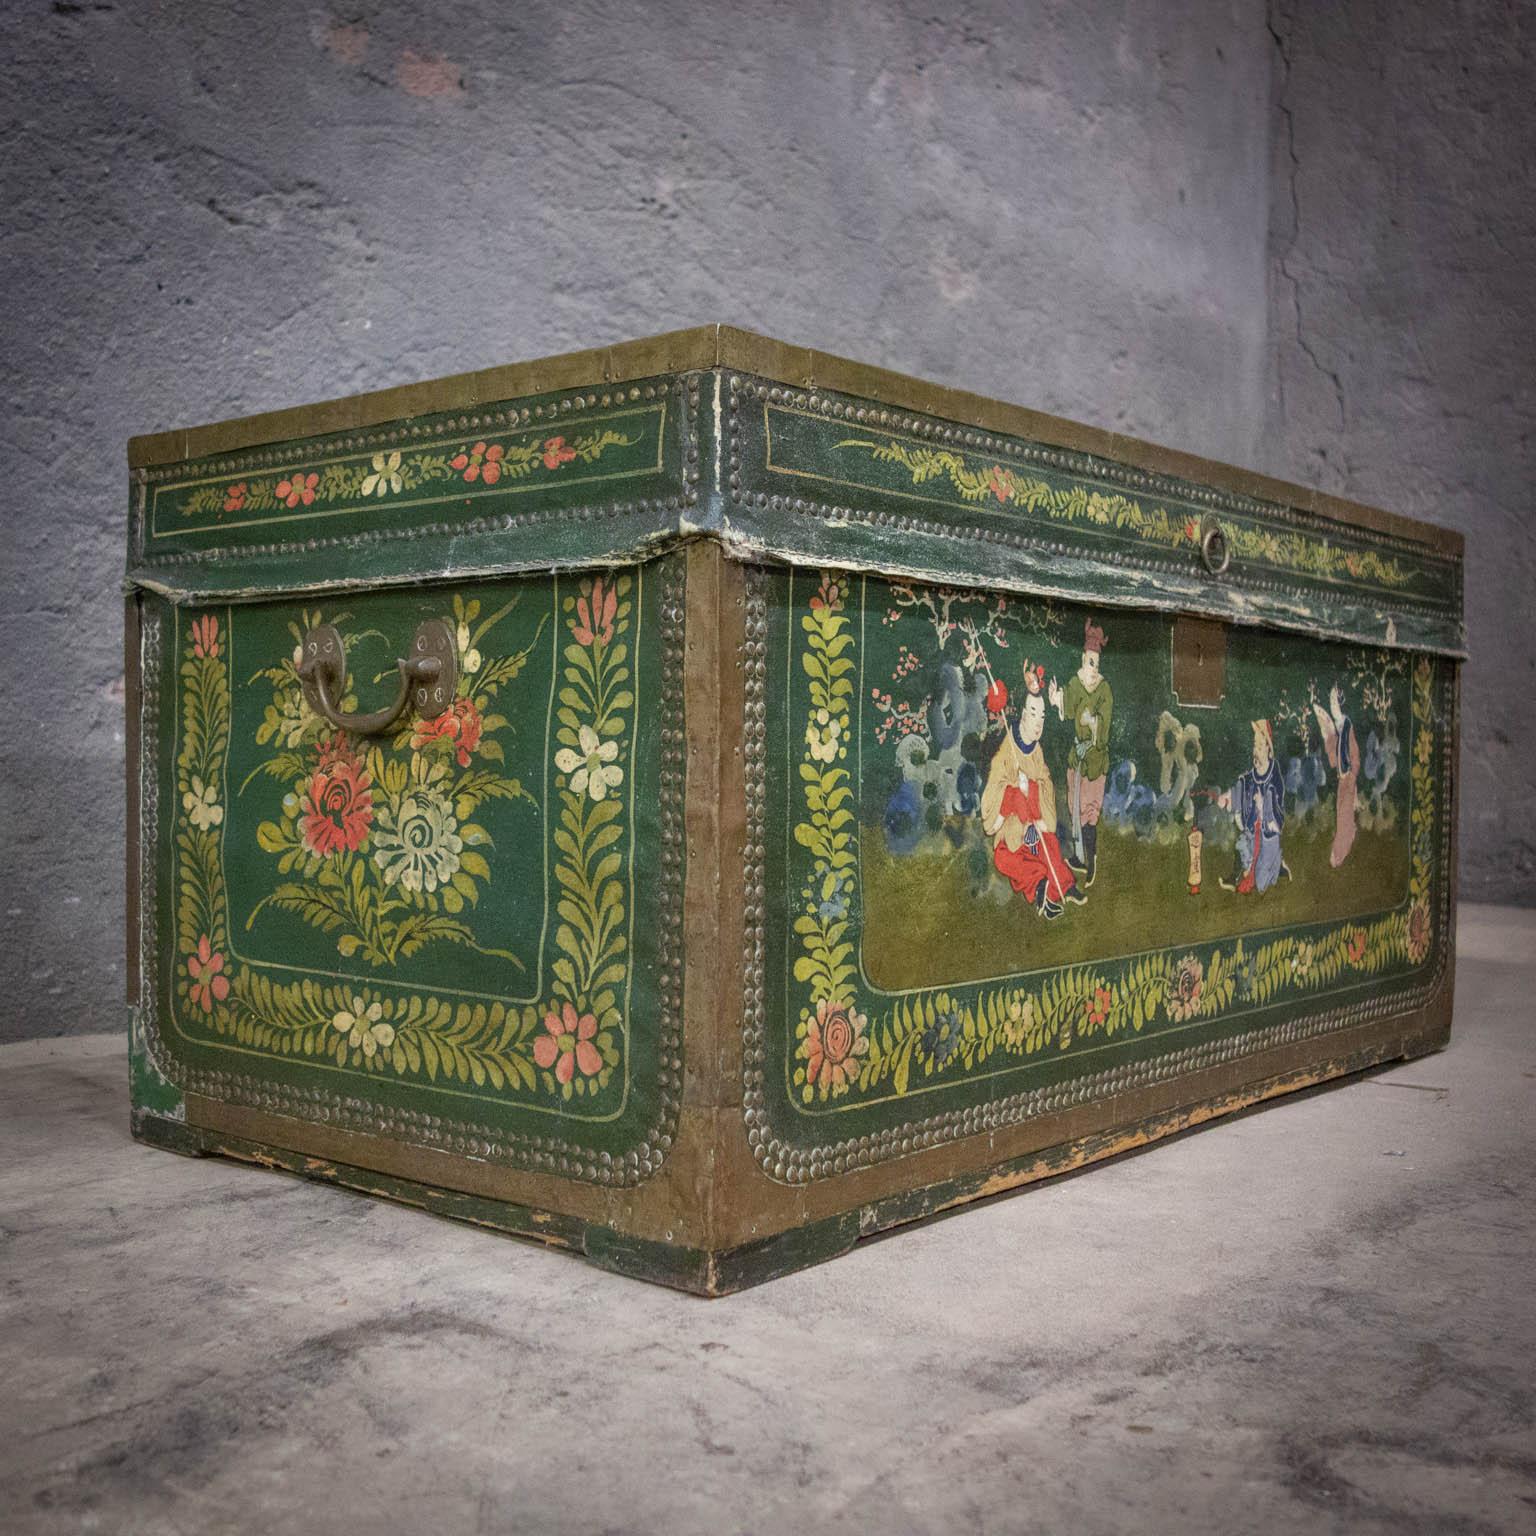 A beautiful camp chest covered with painted leather. The hand painted scenes on the coffin give a beautiful picture of Chinese antiquity. The box has a brass protective edge and handles on the outside. On the inside the box is labeled by the makers.